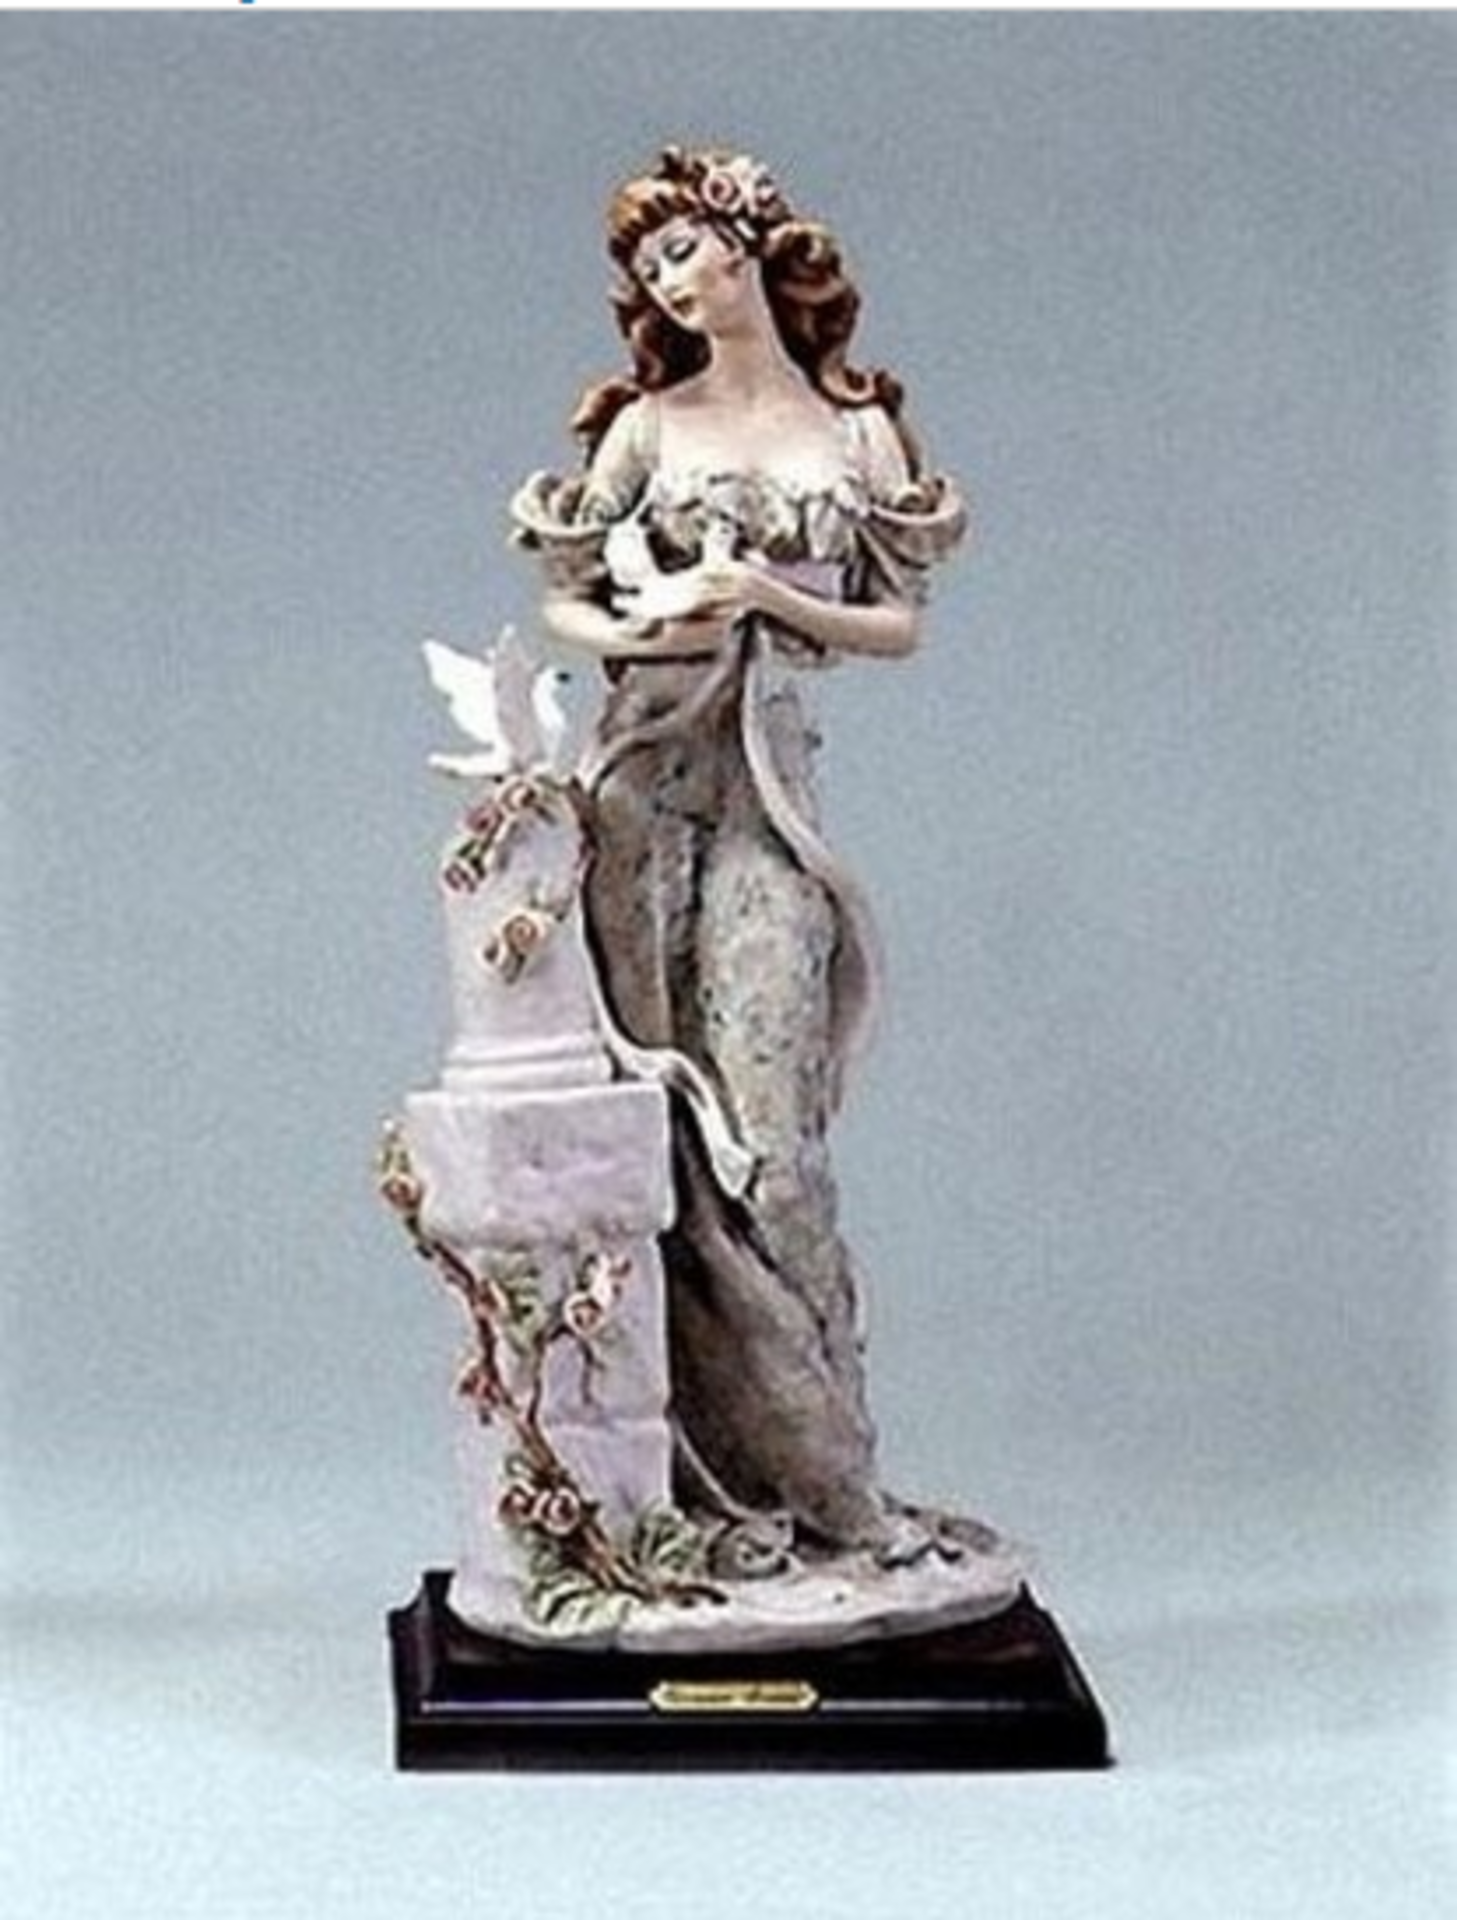 GIUSEPPE ARMANI COLLECTIBLE - LADY WITH DOVES (1995 SOCIETY GIFT) (FOB HOLLYWOOD, FL)